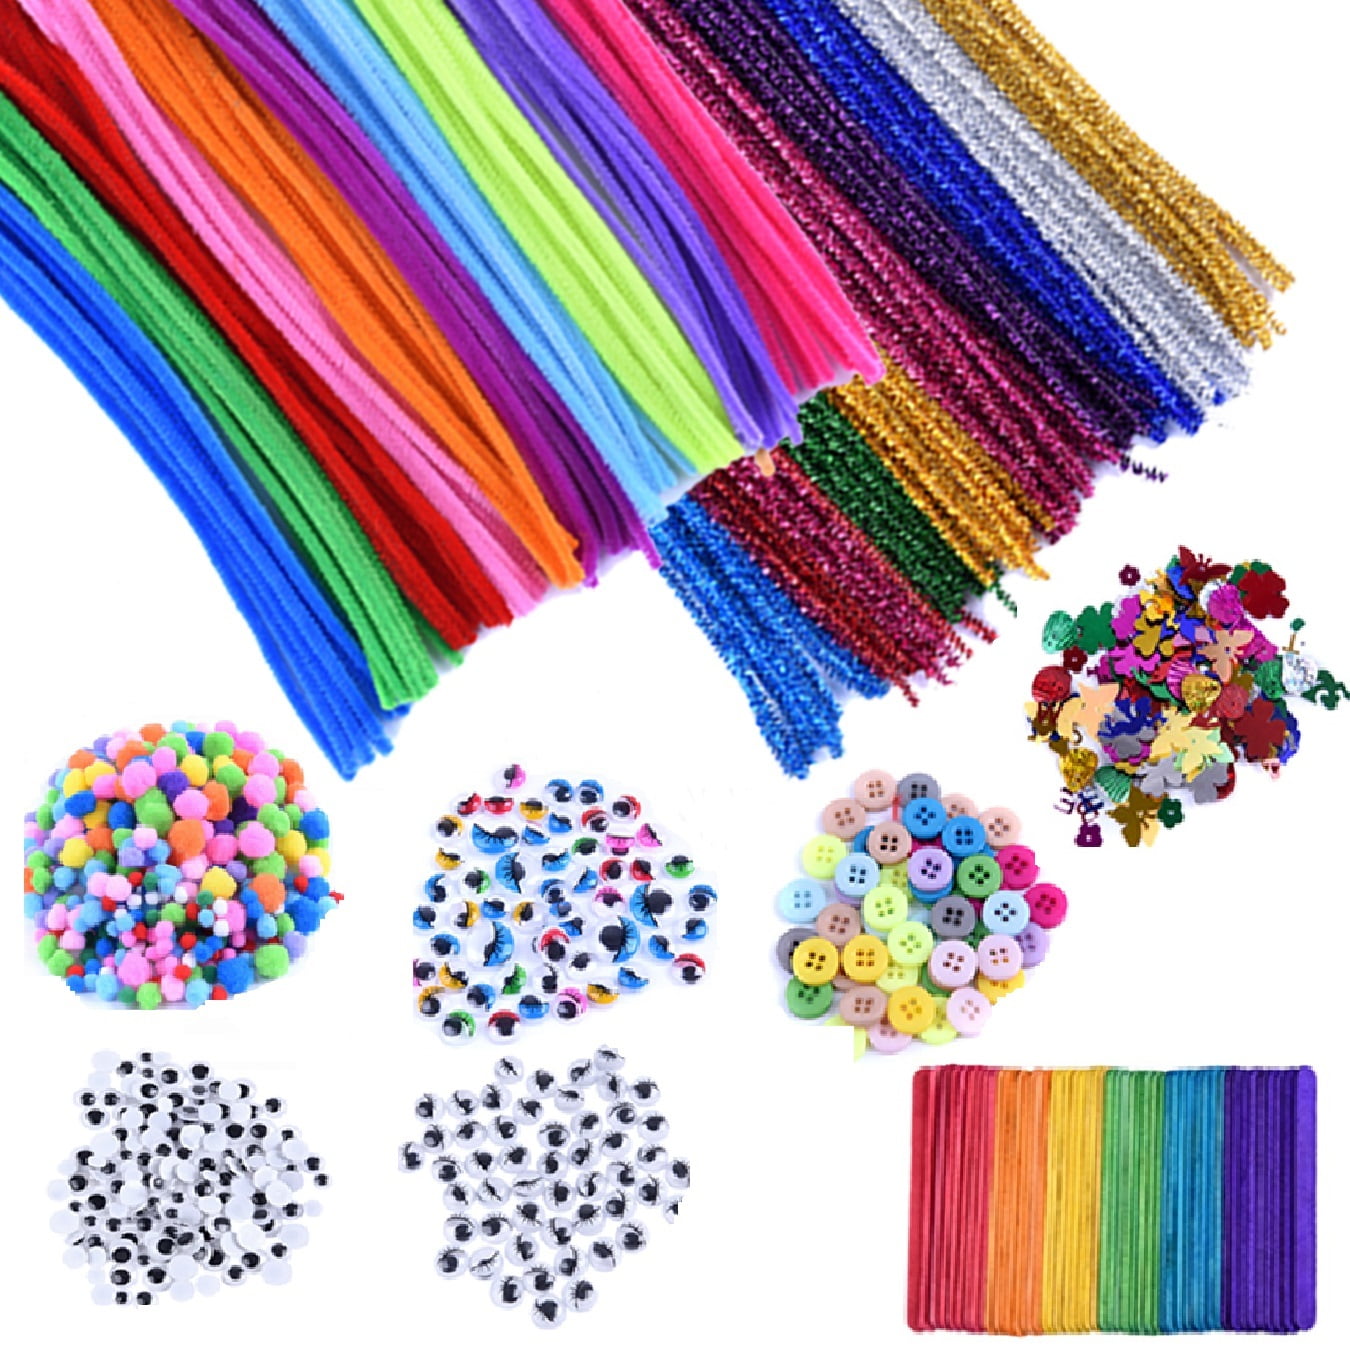 Caydo 3000 Pcs Kids Art and Crafts Supplies, Toddler DIY Craft Art Supplies  Set Include Pipe Cleaners, Pom Poms, Portable 3 Layered Folding Storage